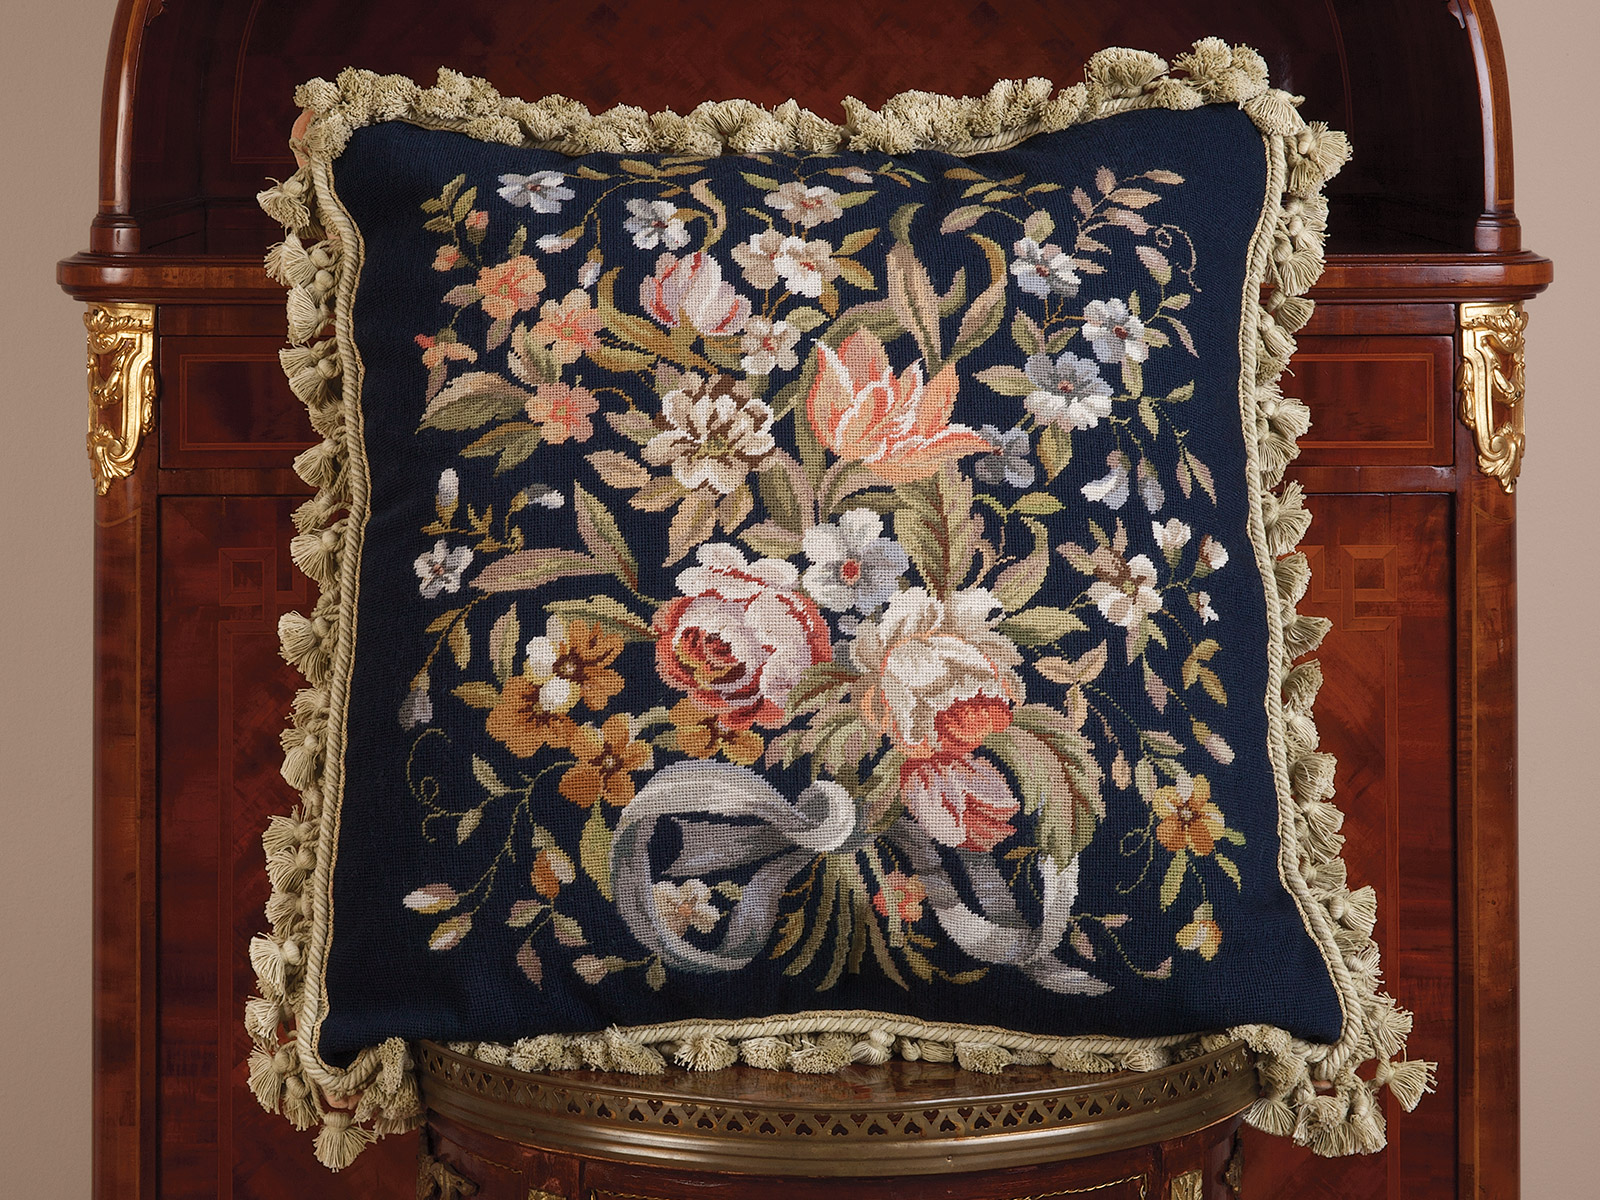 Pendragon Tapestry Pillow